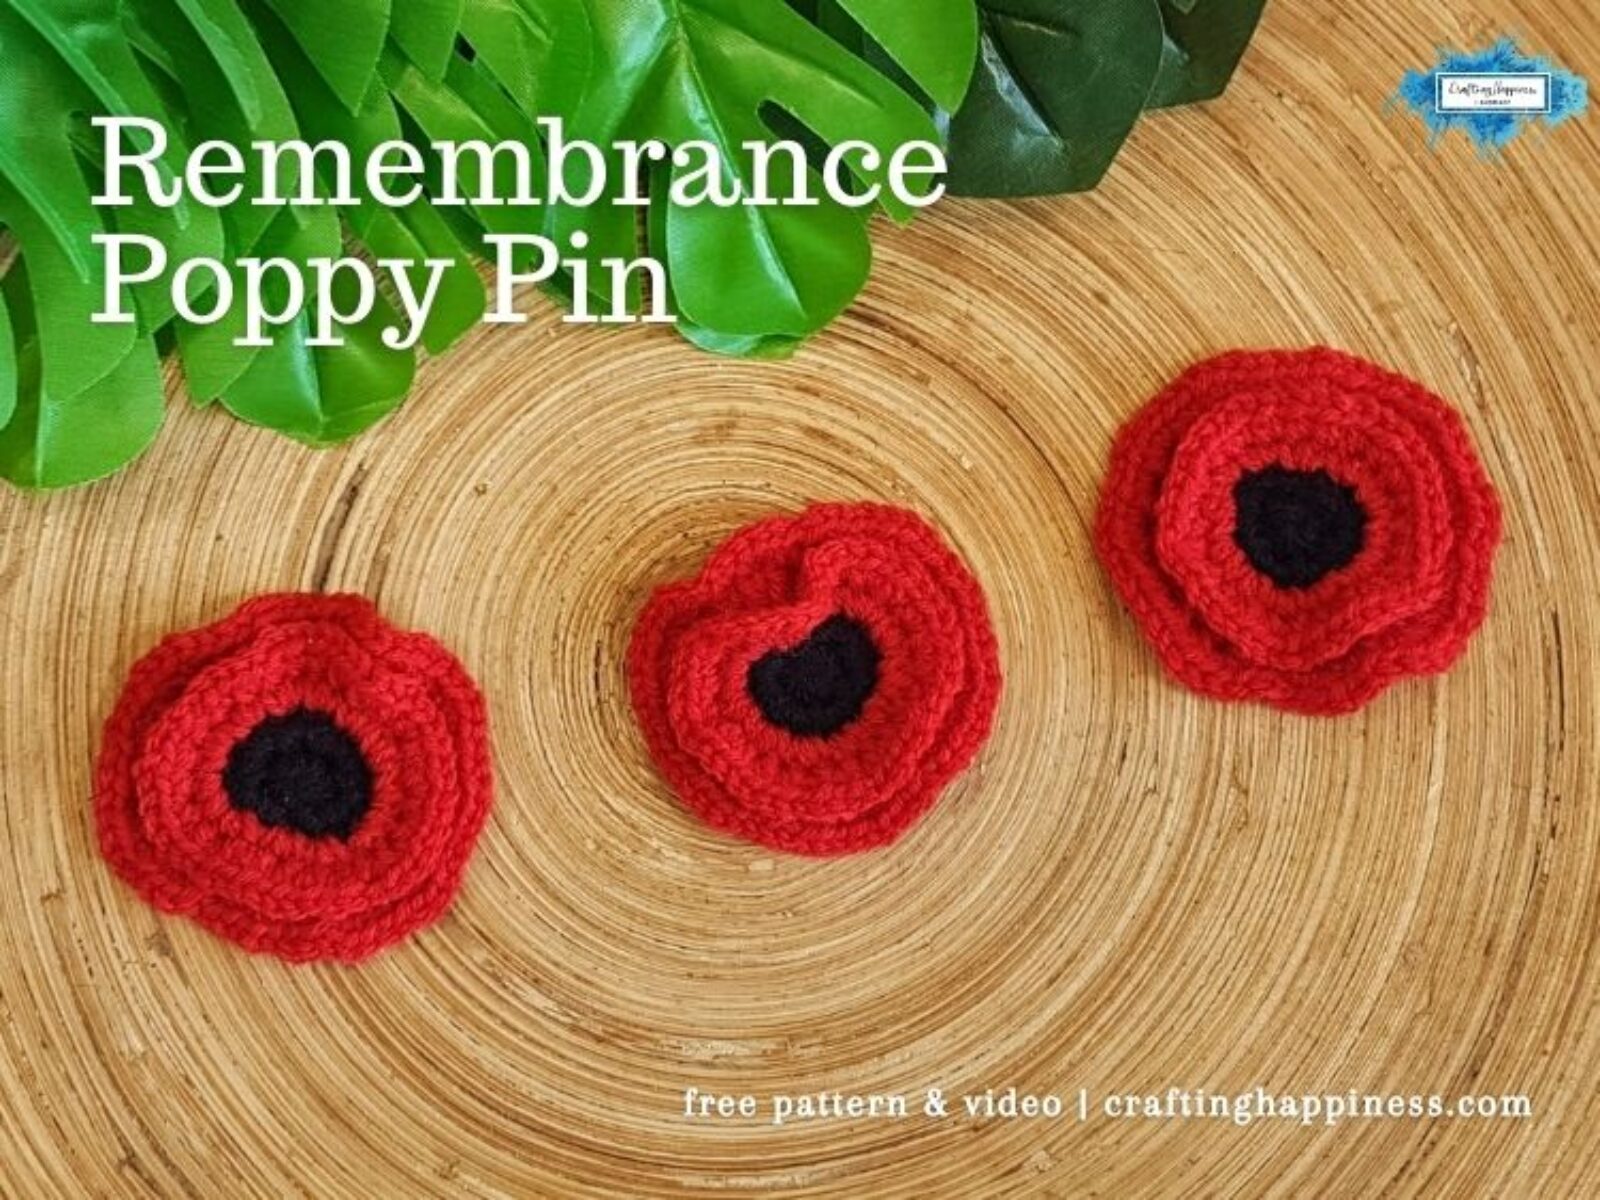 FB BLOG POSTER TEMPLATE - Remembrance Poppy Pin